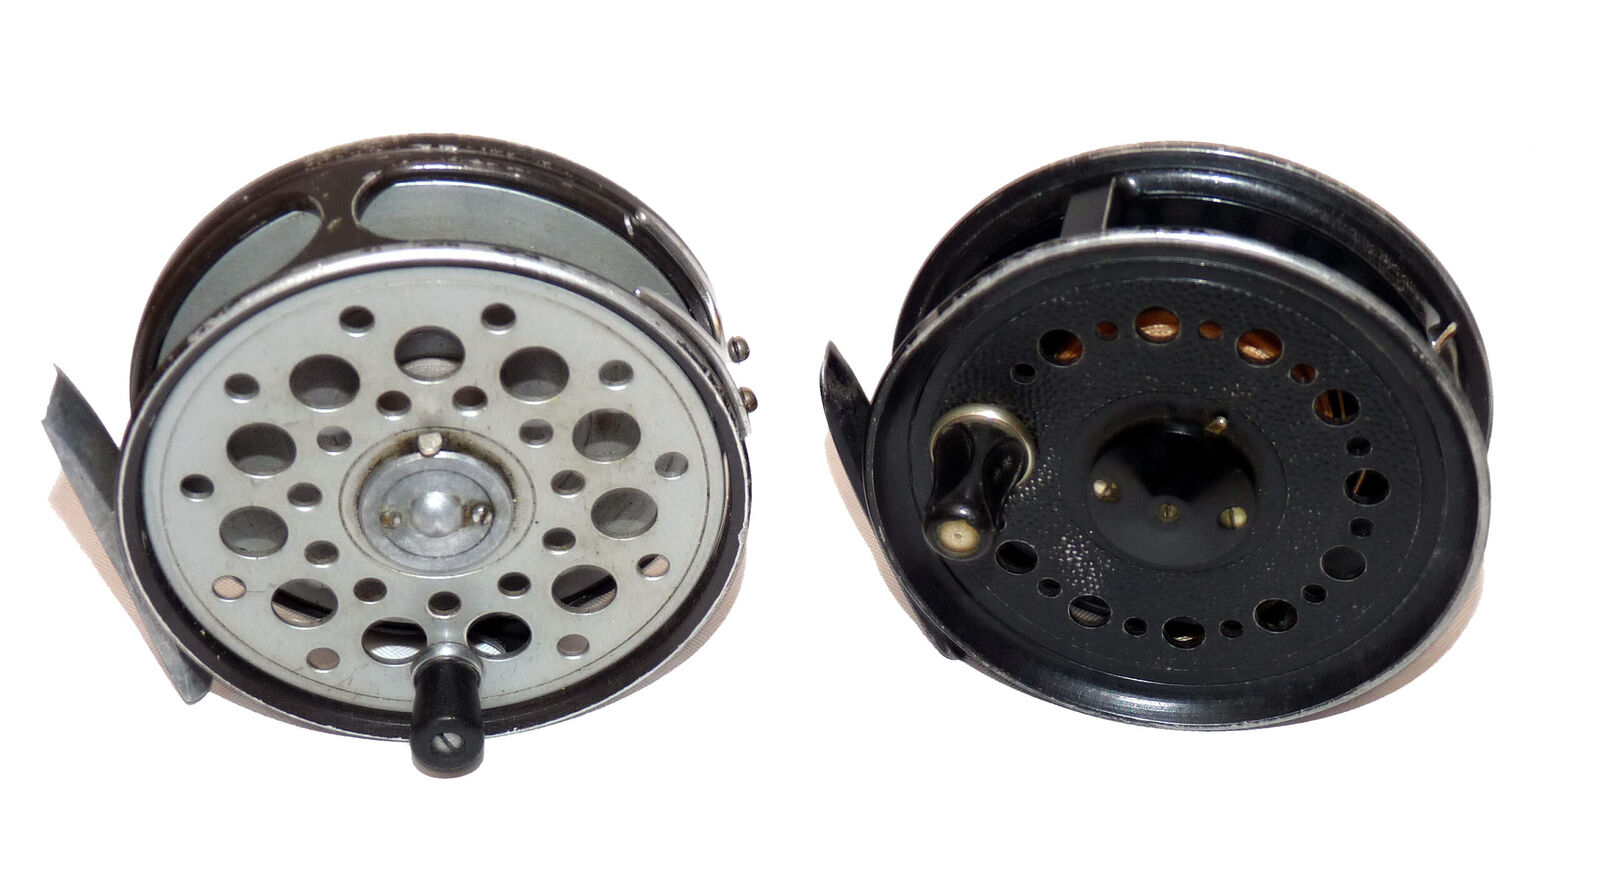 Farlow Serpent 3.5” vintage alloy trout fly reel & JW Young Pridex 3.5” narro...